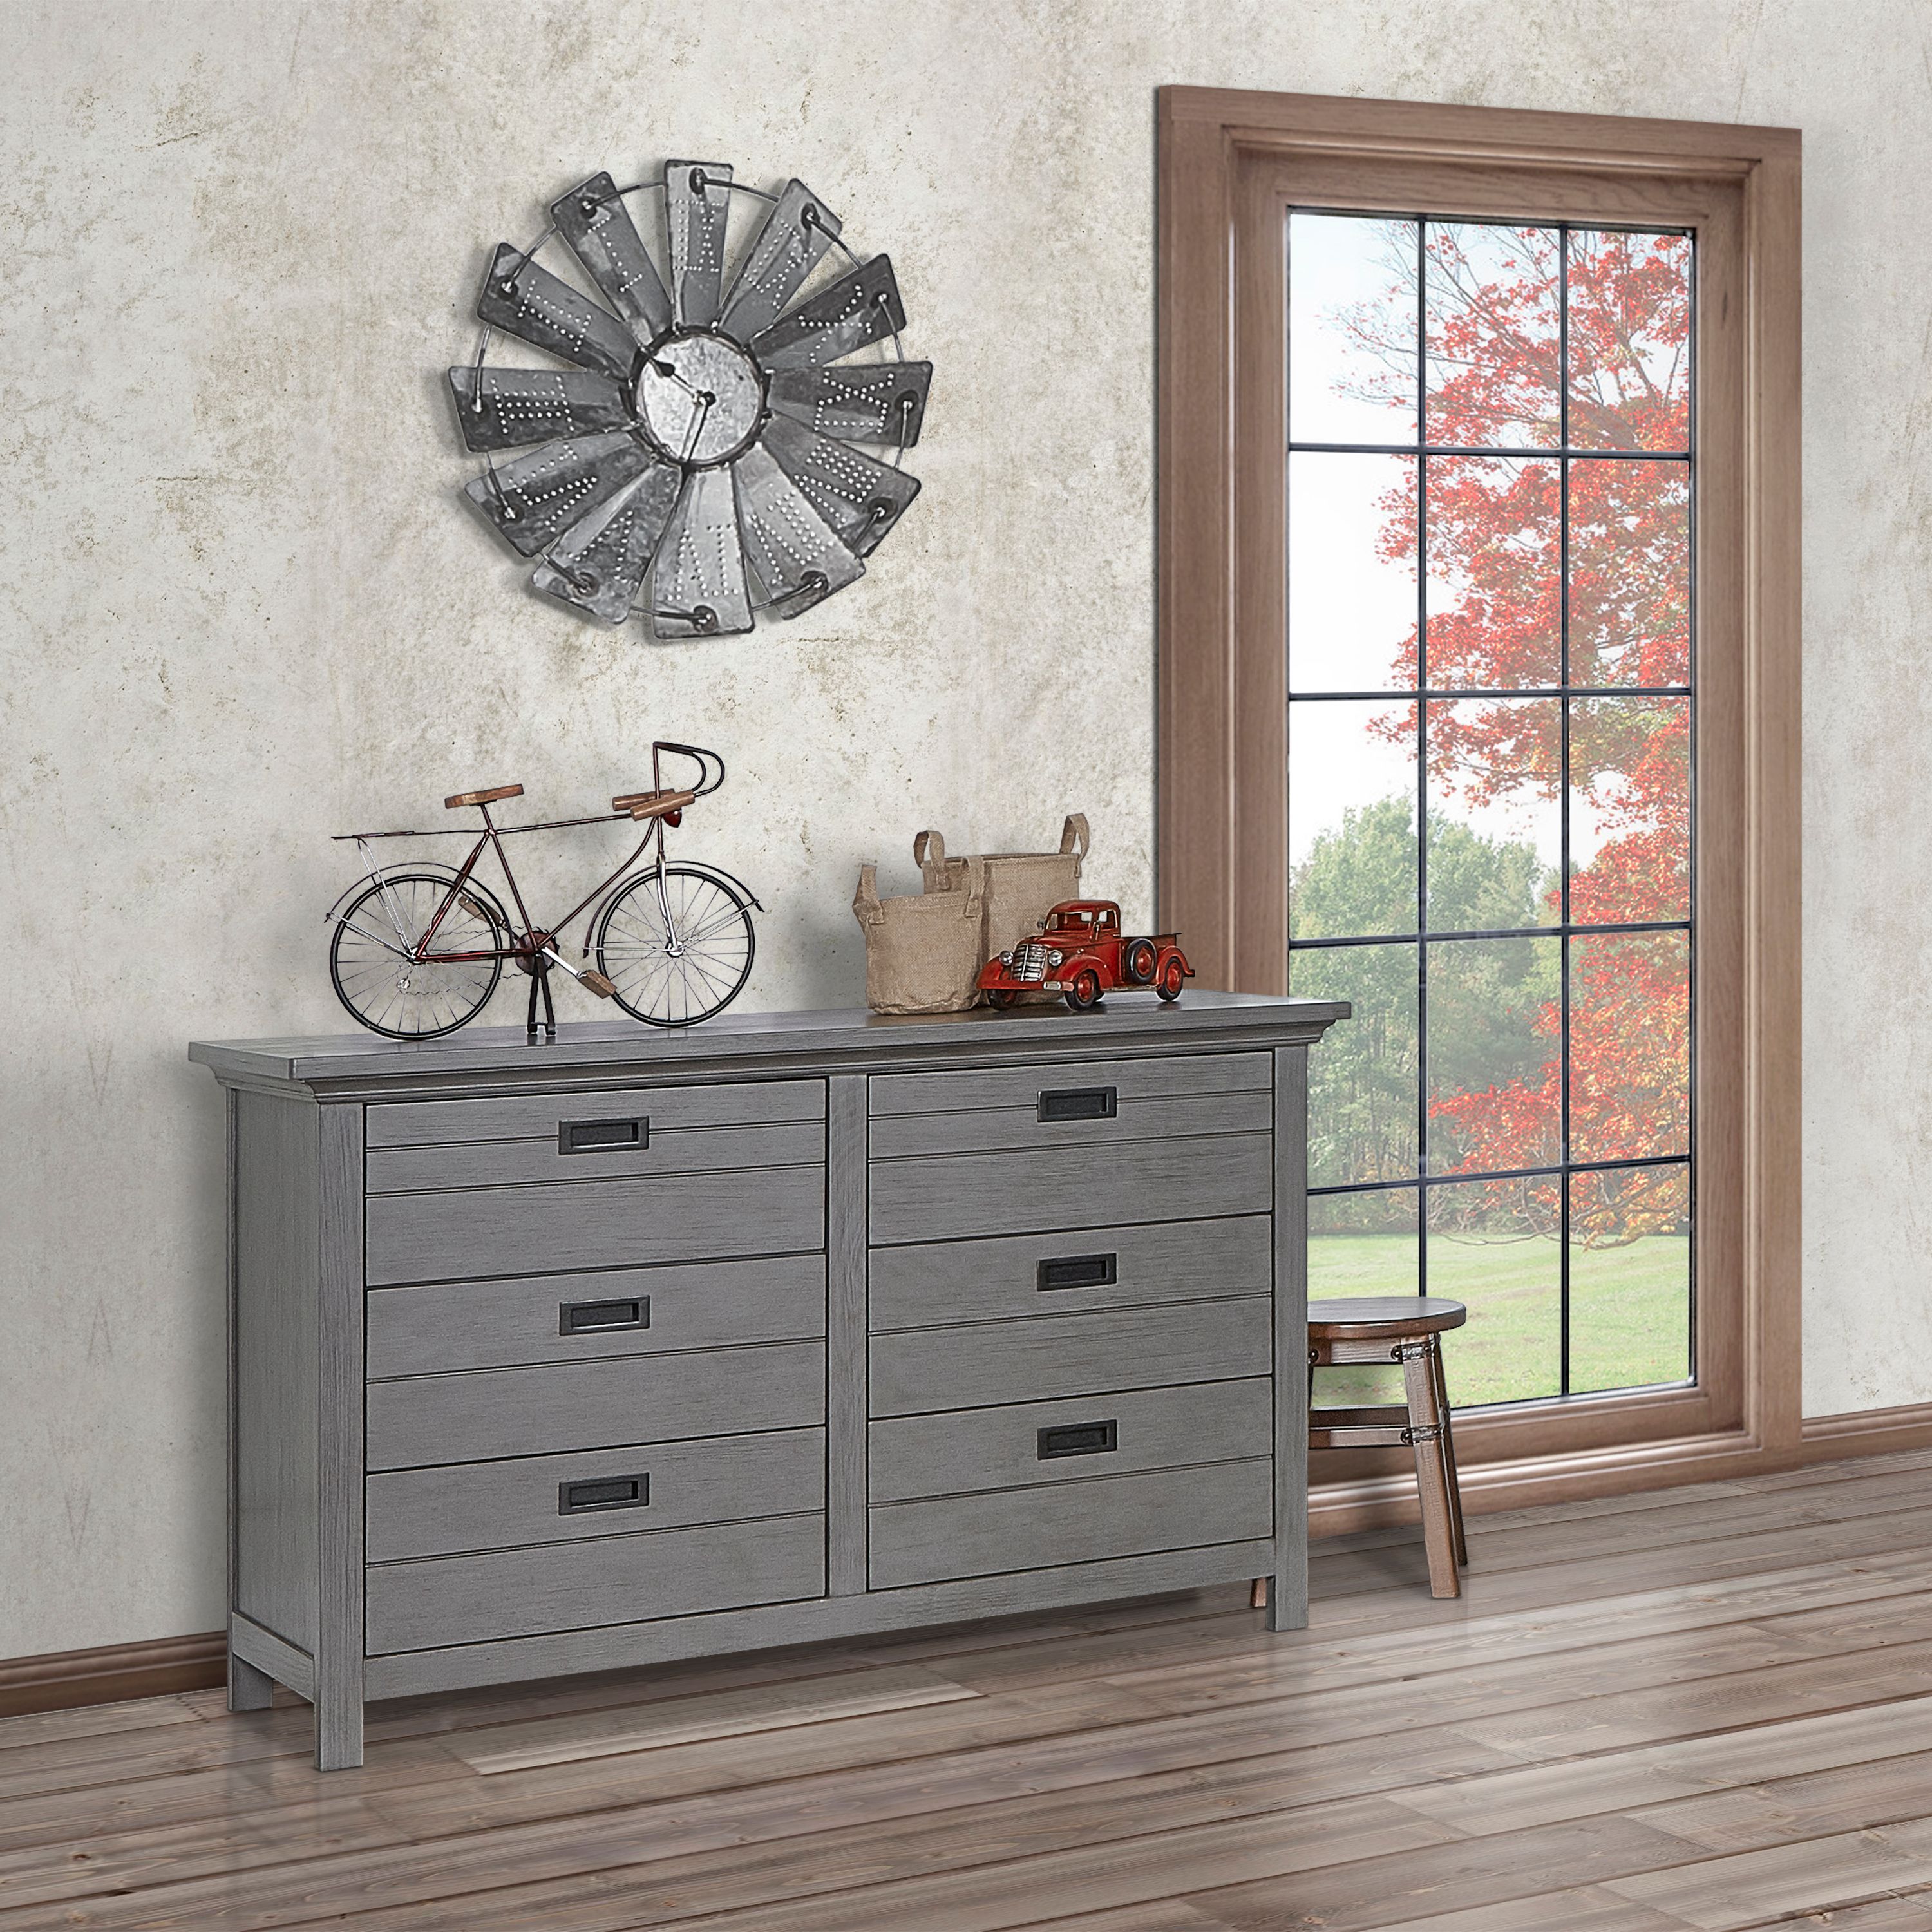 Evolur Waverly 6 Drawer Double Dresser Rustic Gray - image 2 of 3